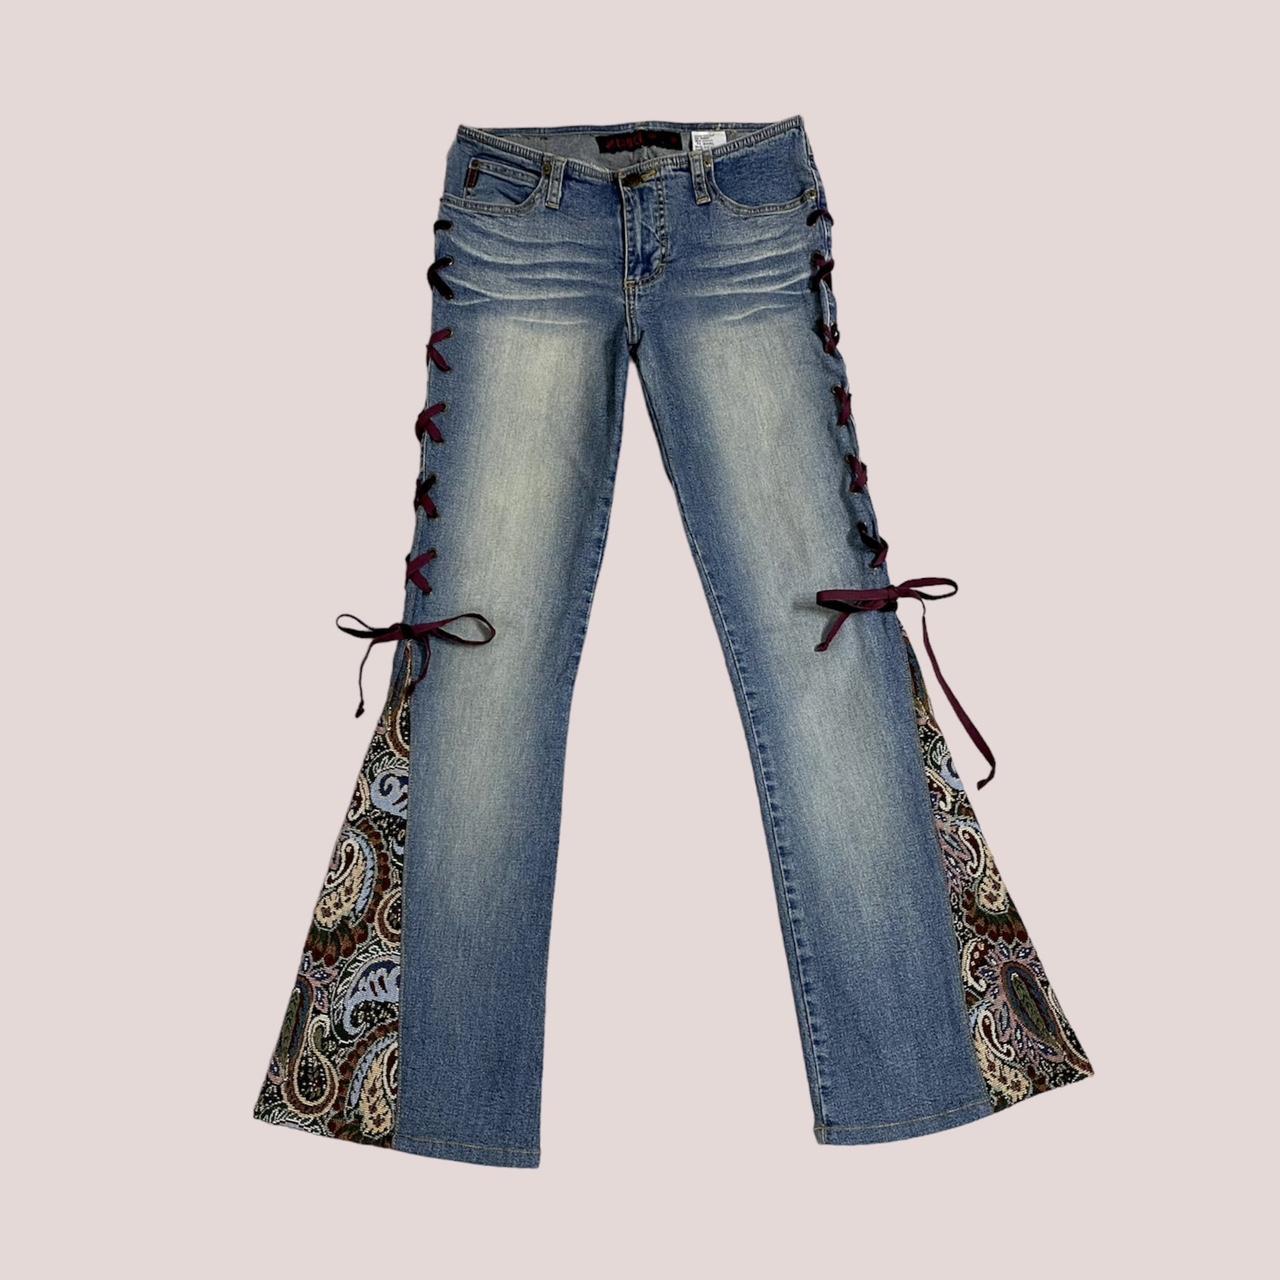 mudd lace up flare jeans ♡Brand: Y2K mudd! ... - Depop